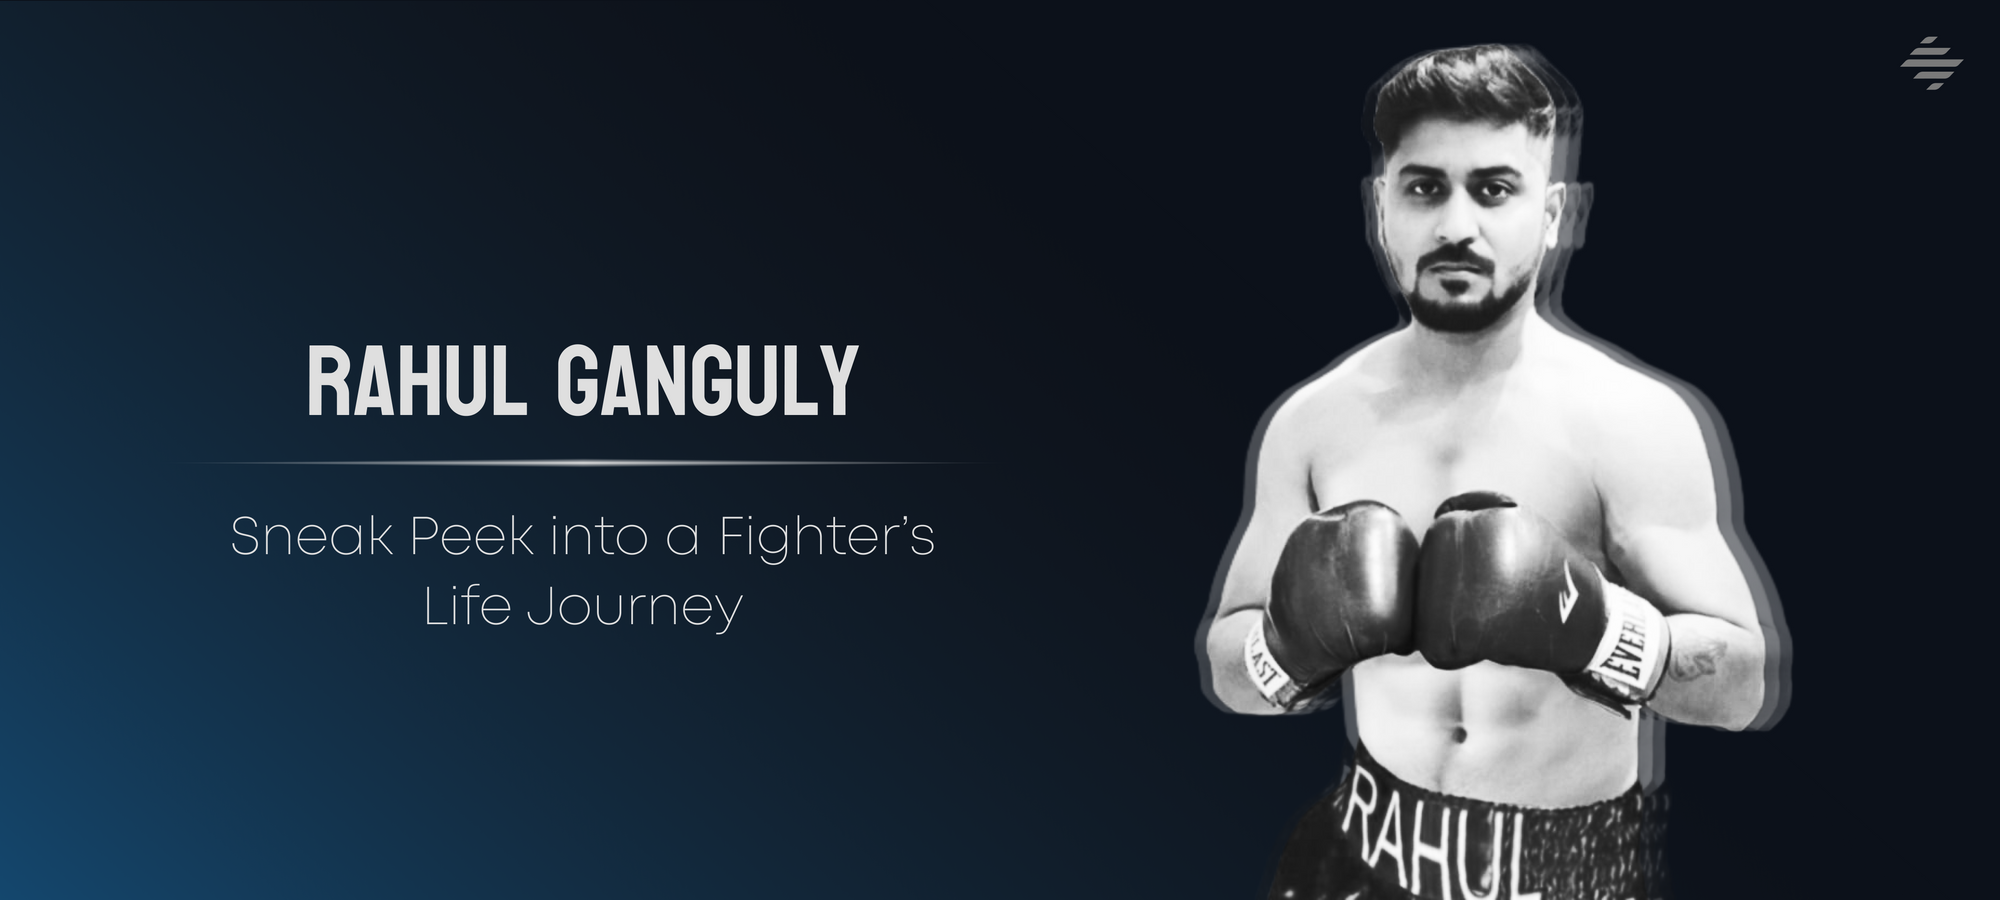 Rahul Ganguly's journey to the boxing ring. 